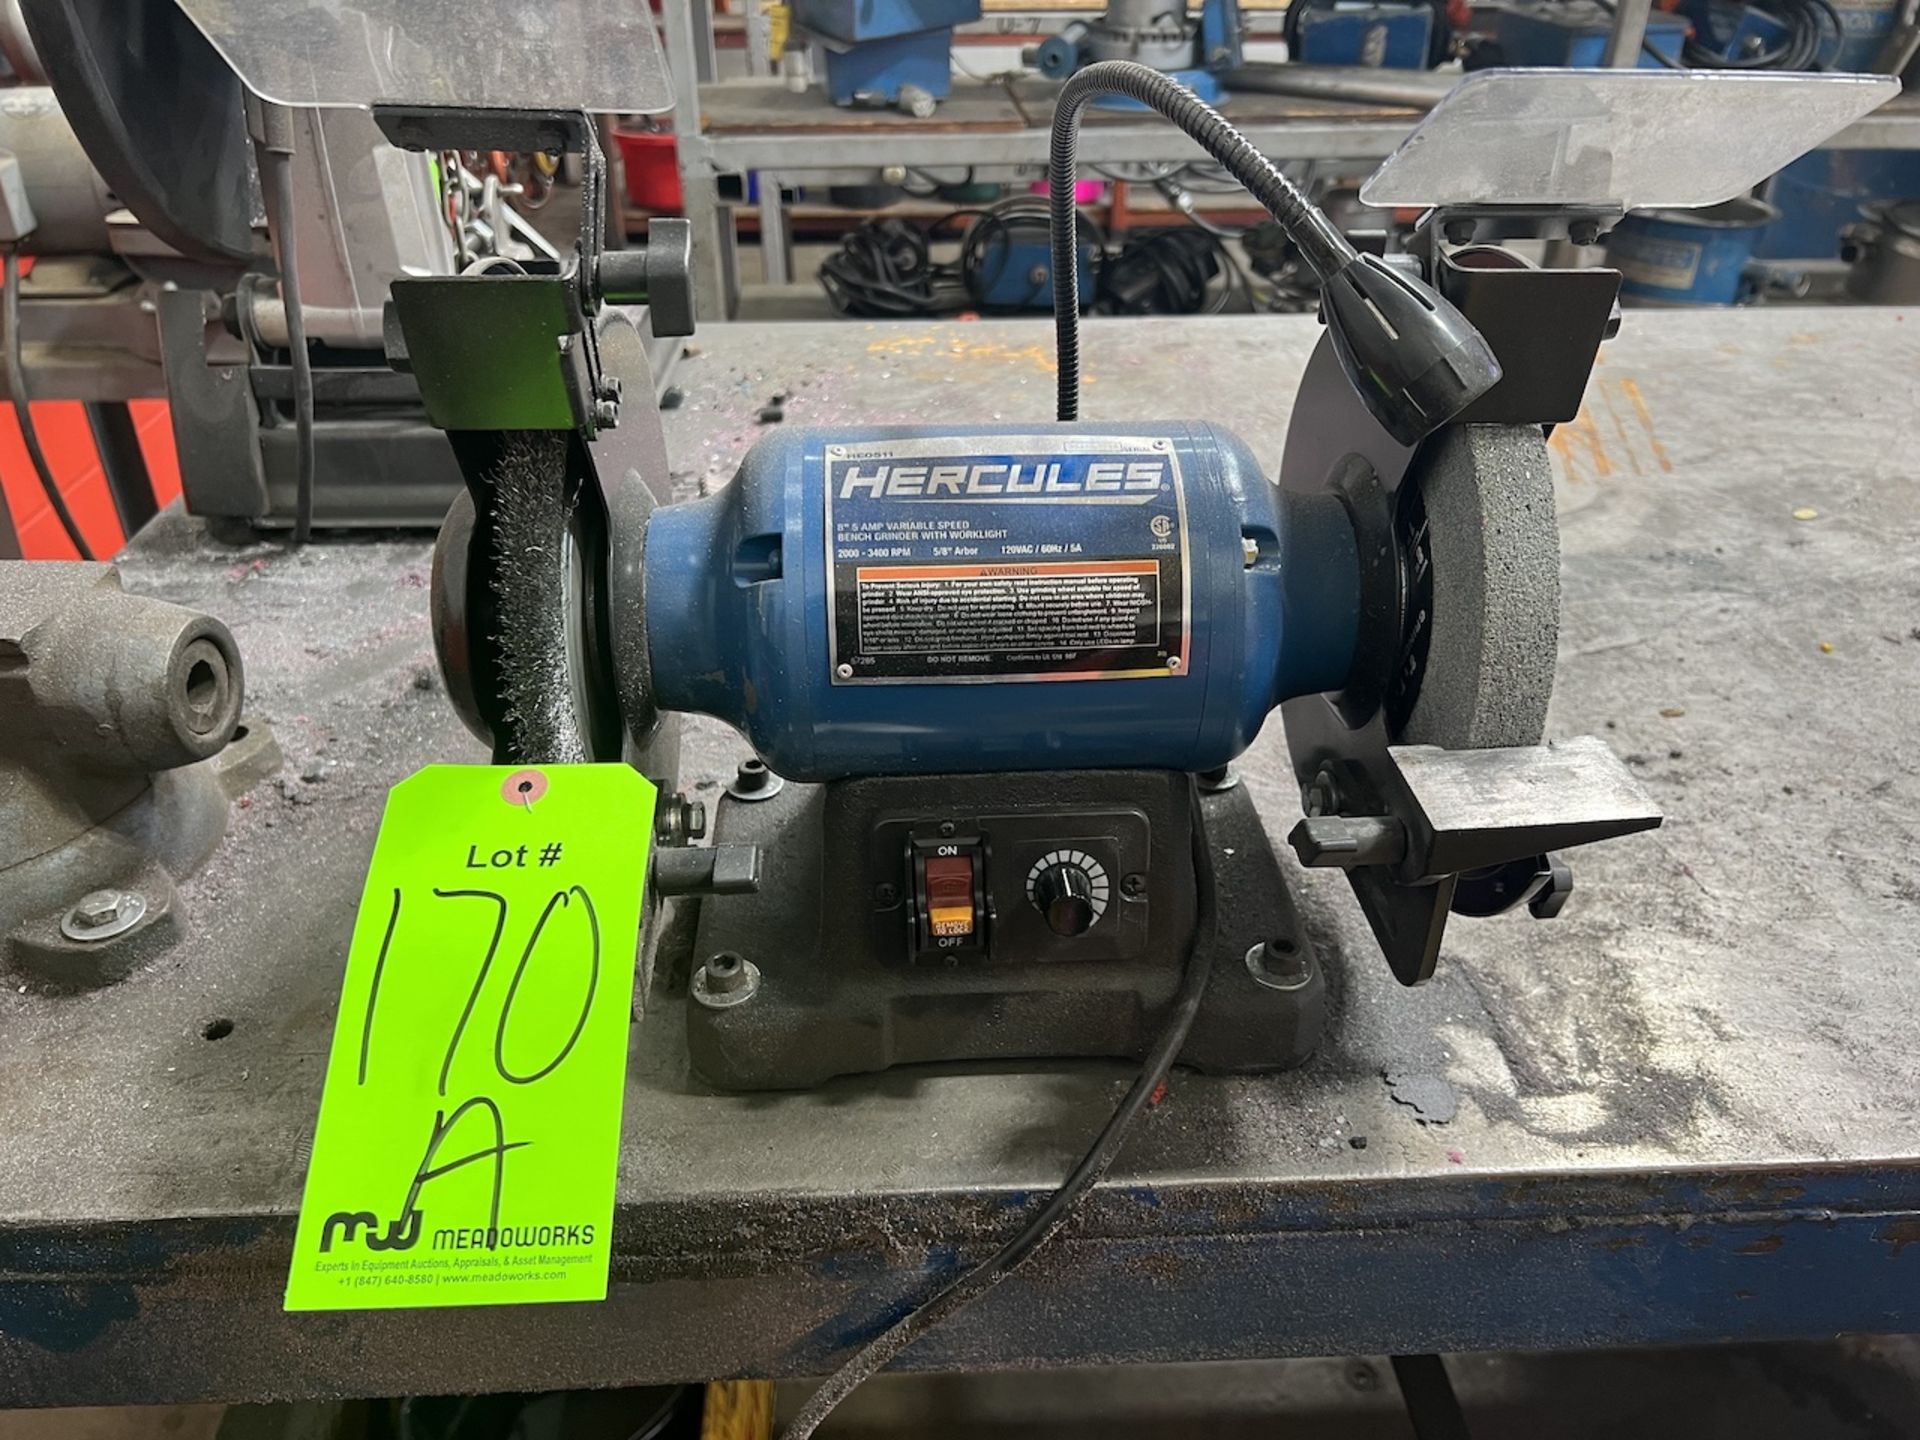 Hercules 8" Double End Bench Grinder